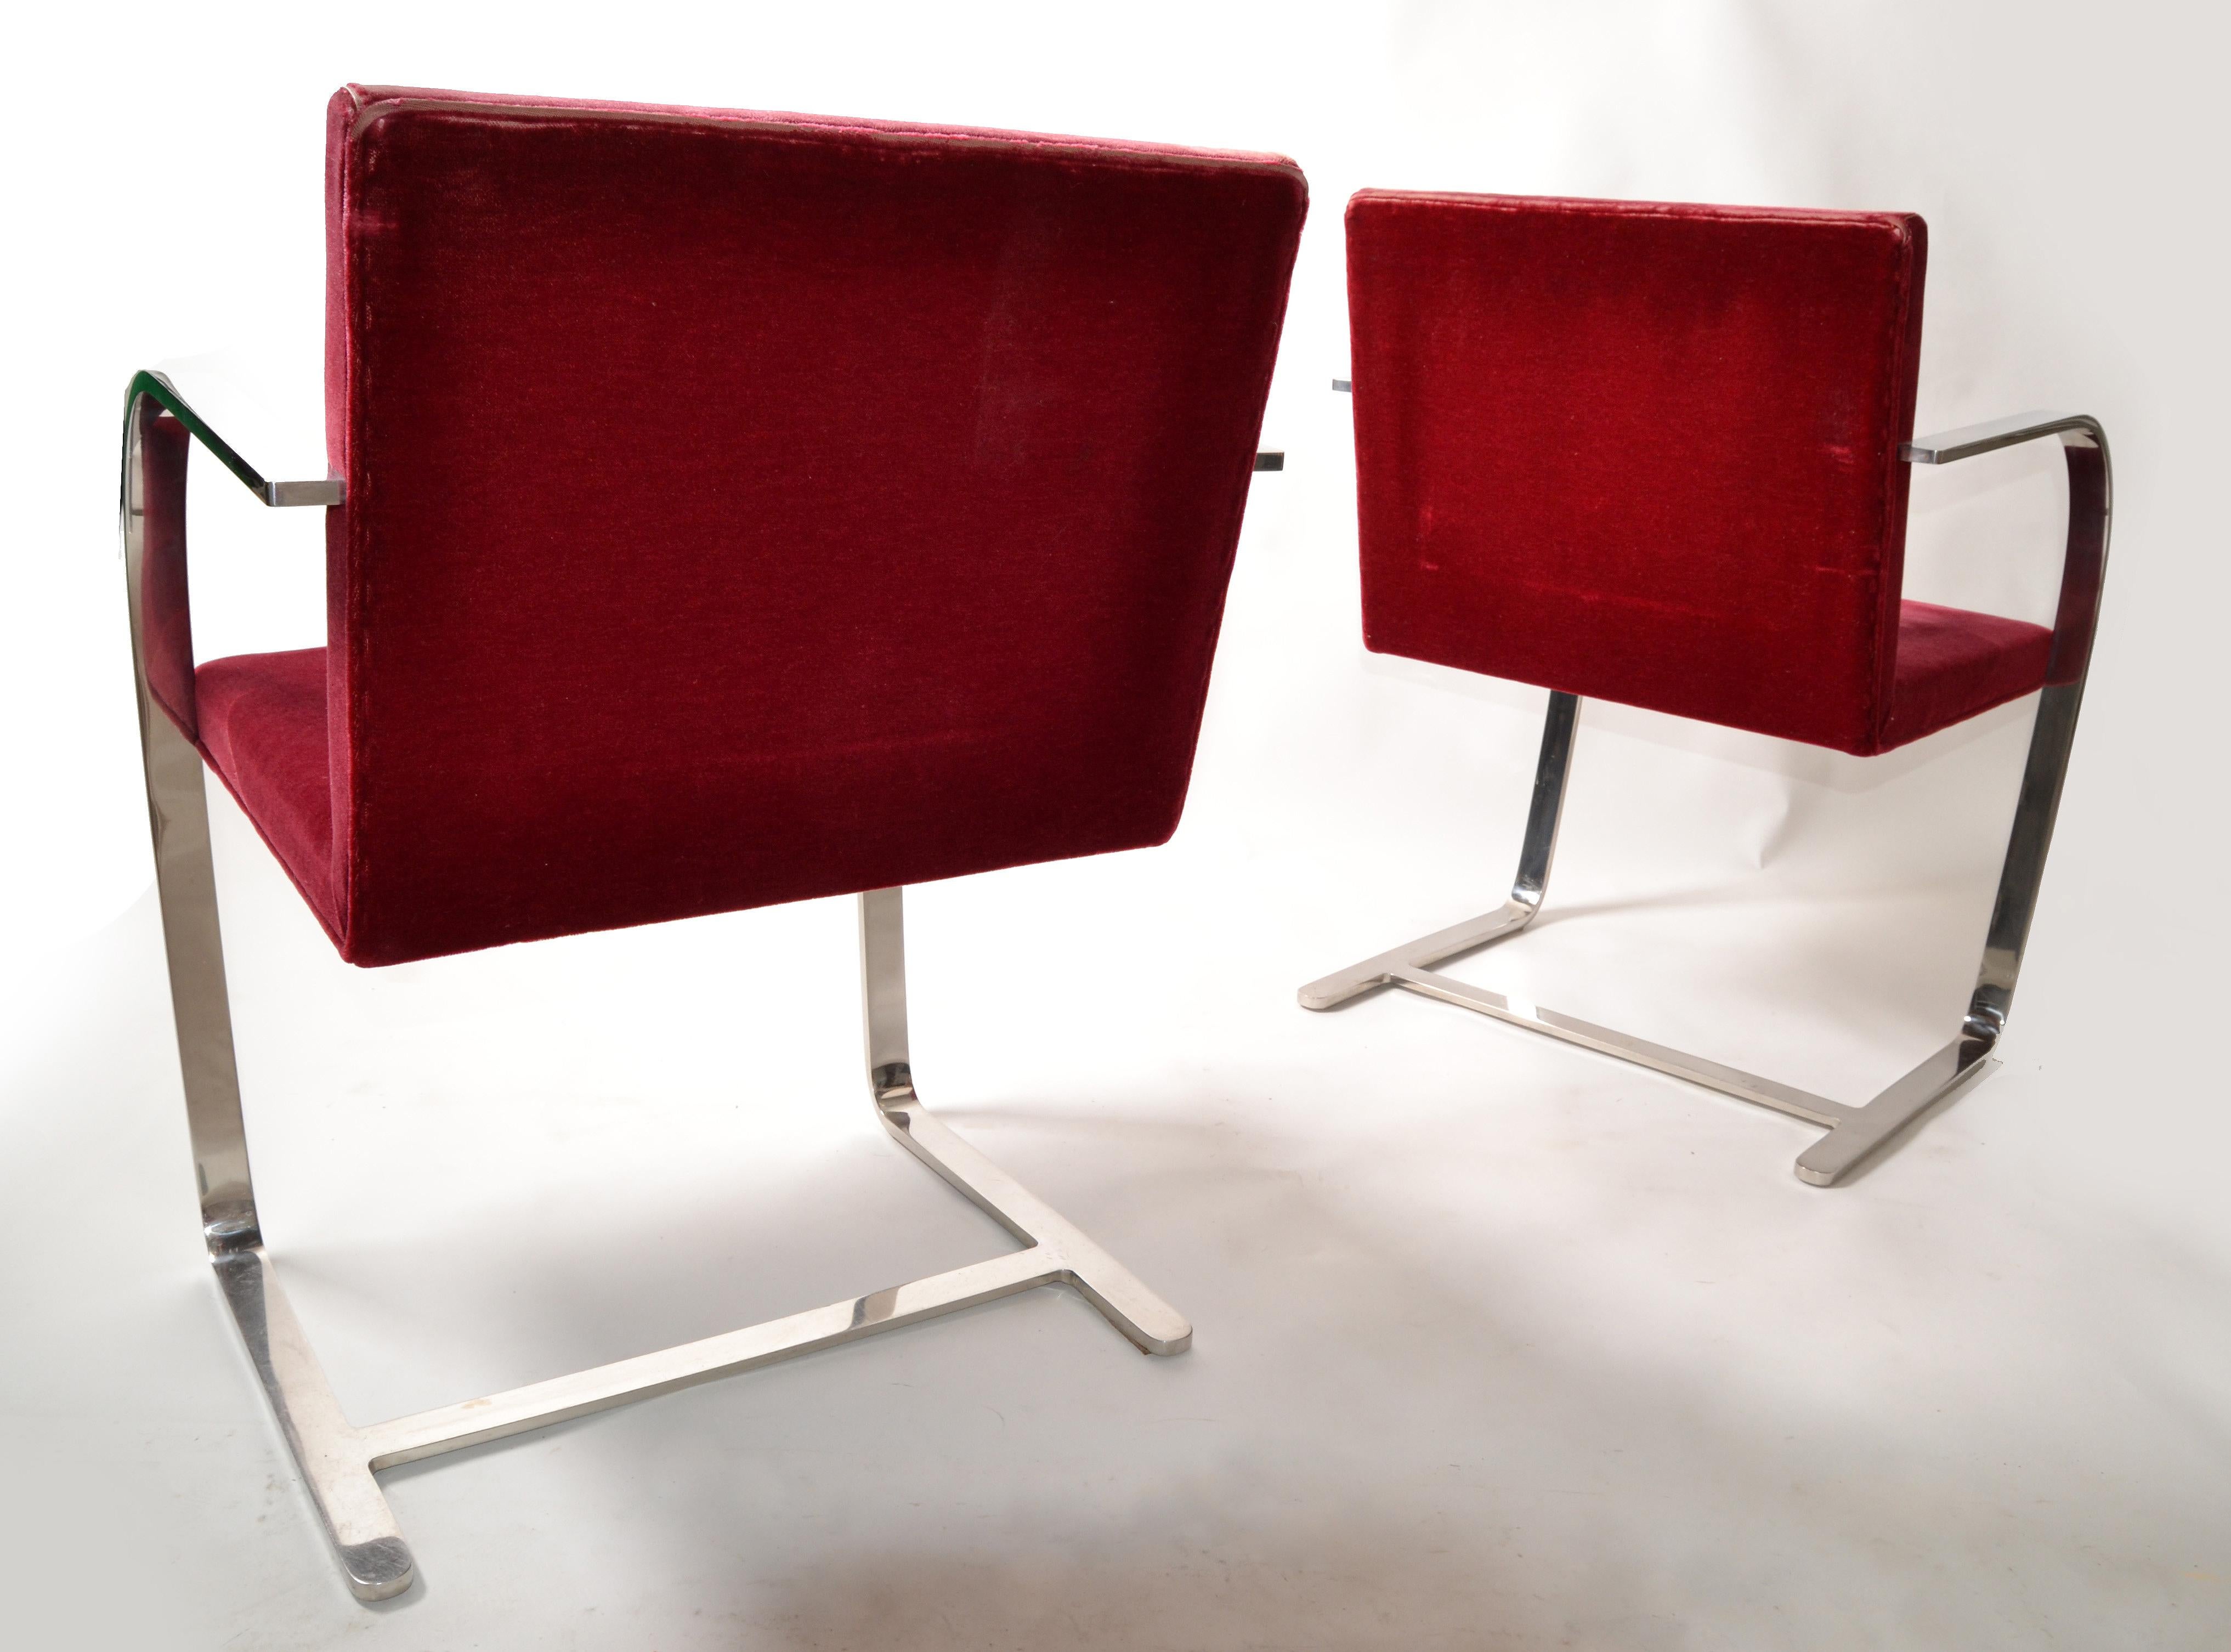 Mies Van Der Rohe for Knoll Stainless Steel Brno Chairs Red Velvet 1979, Pair For Sale 3